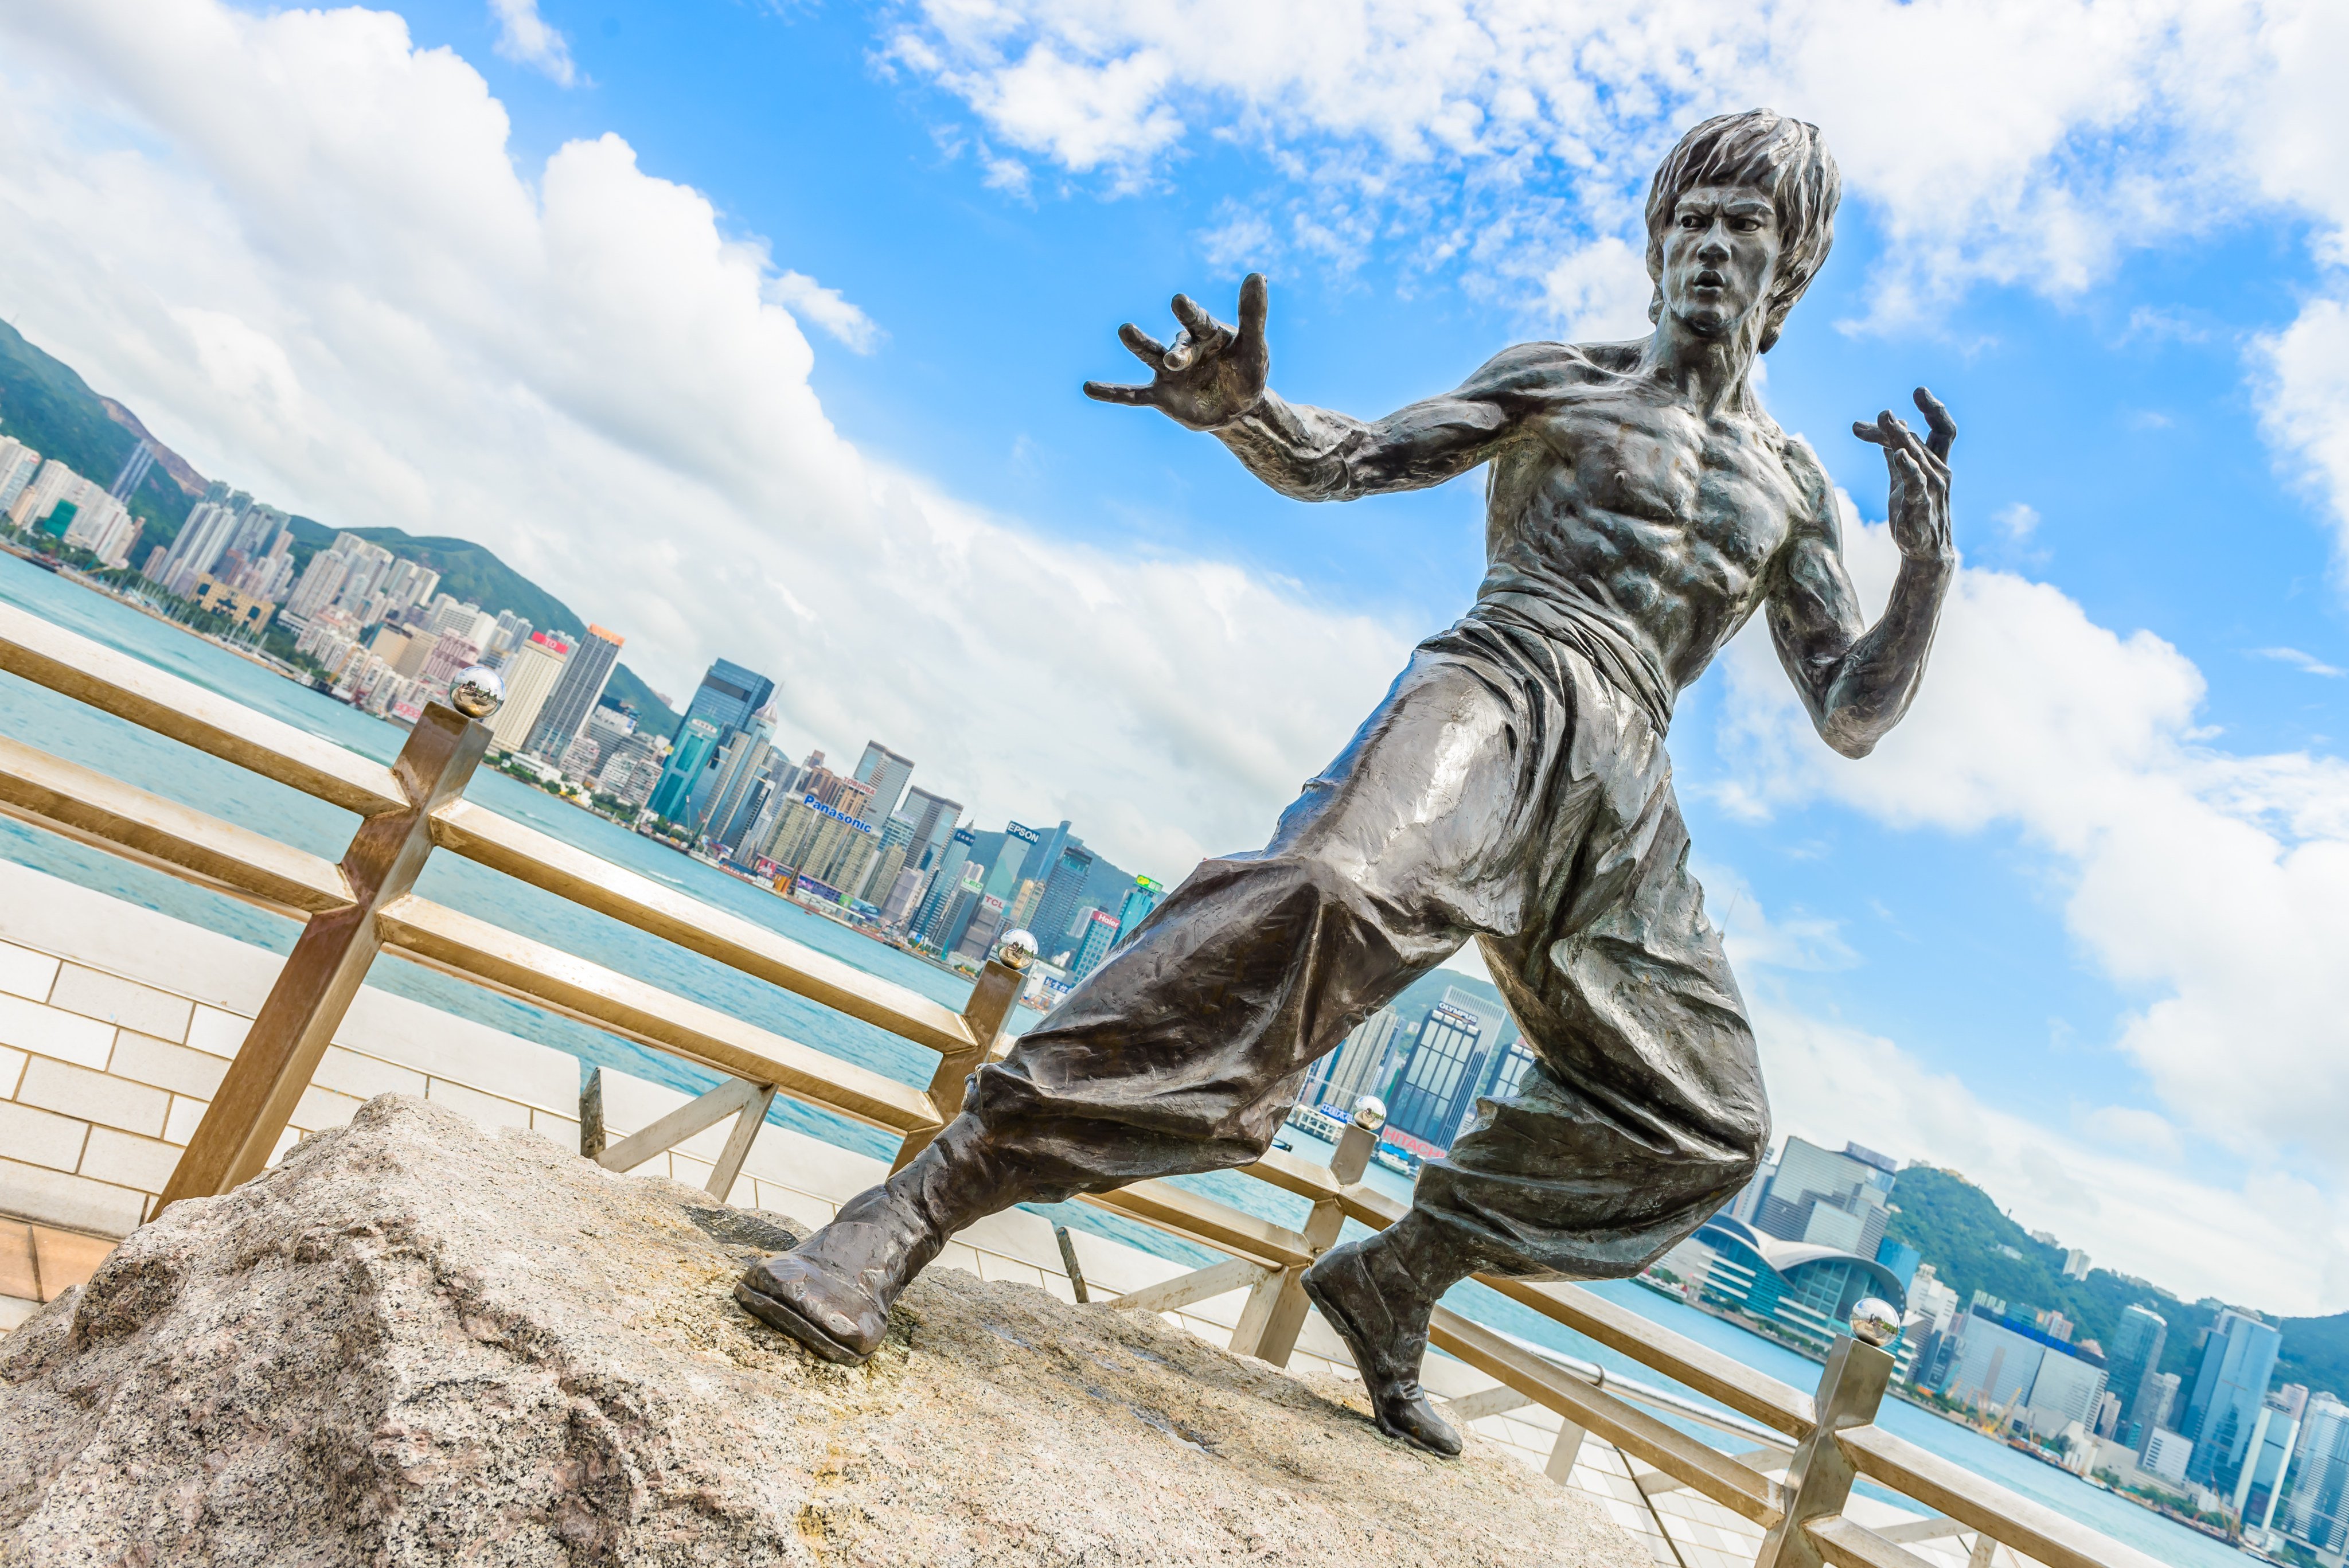 Hong Kong has embraced Bruce Lee as a native son. Pictured is a statue of the martial arts star and actor near the Tsim Sha Tsui waterfront in the city. Photo: Shutterstock